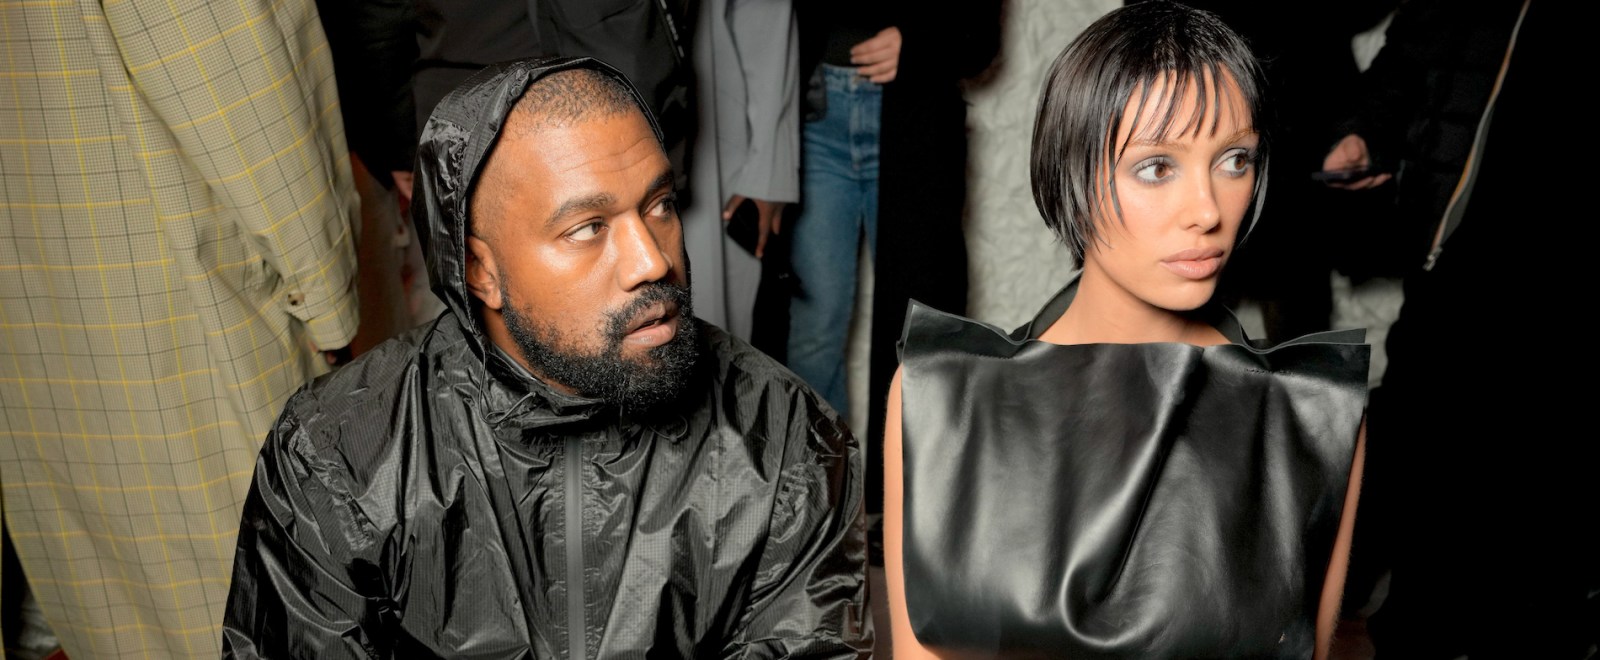 Kanye West Allegedly Punched A Man Who ‘Sexually Assaulted’ Wife Bianca Censori